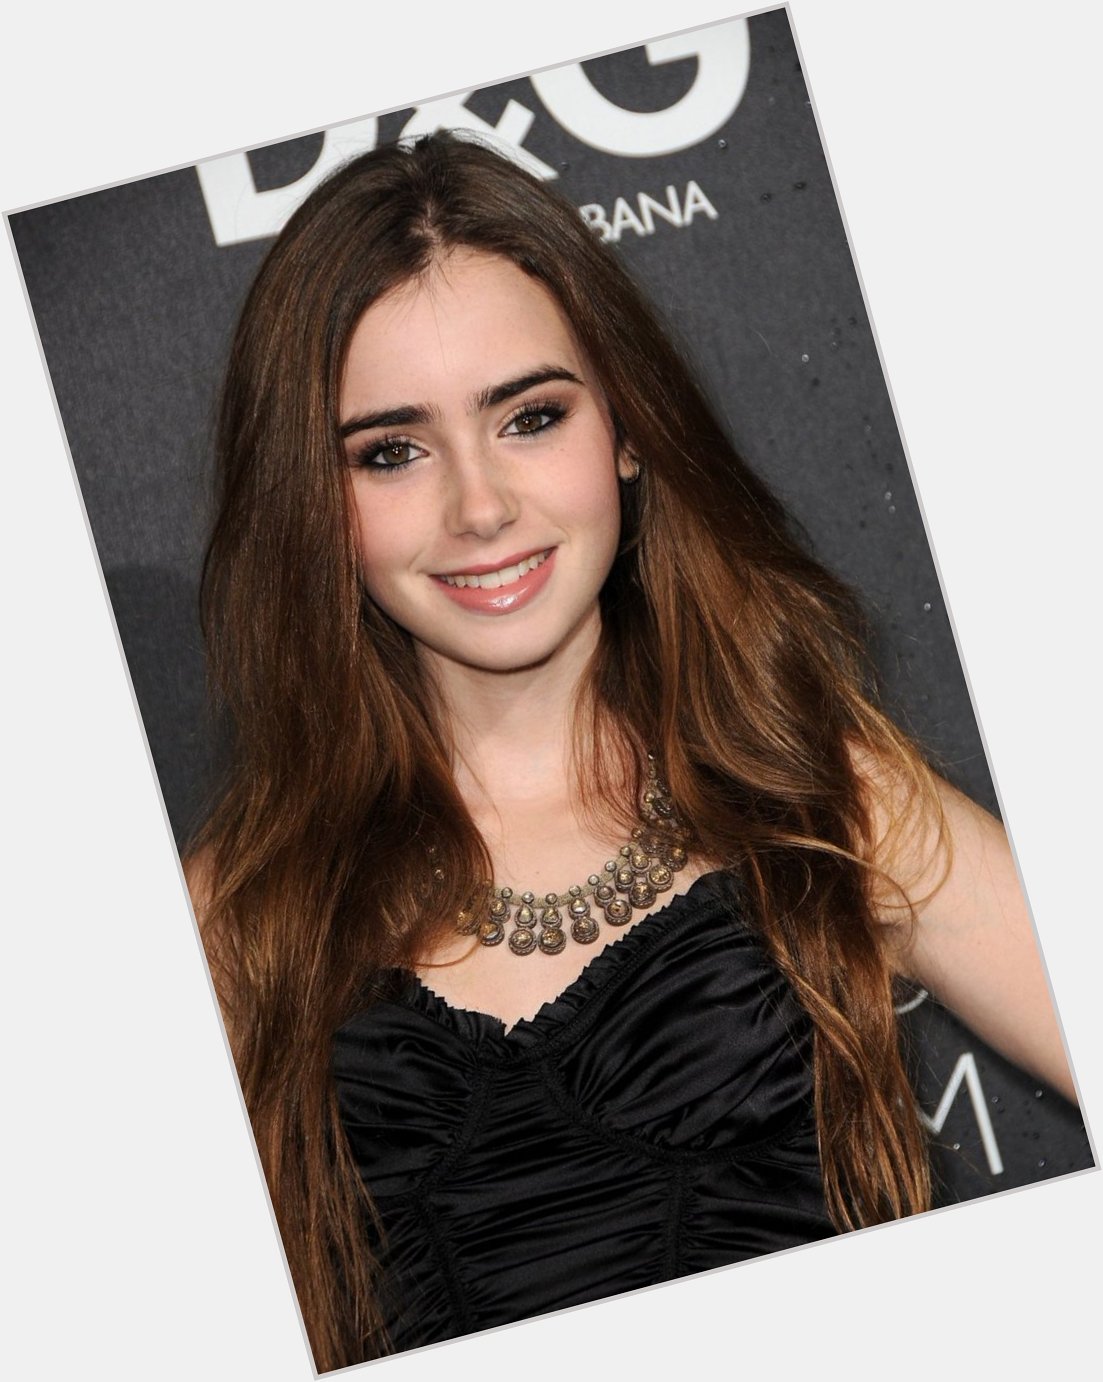 Omg it\s Lily Collins\s birthday and I didn\t know that??? Happy birthday 